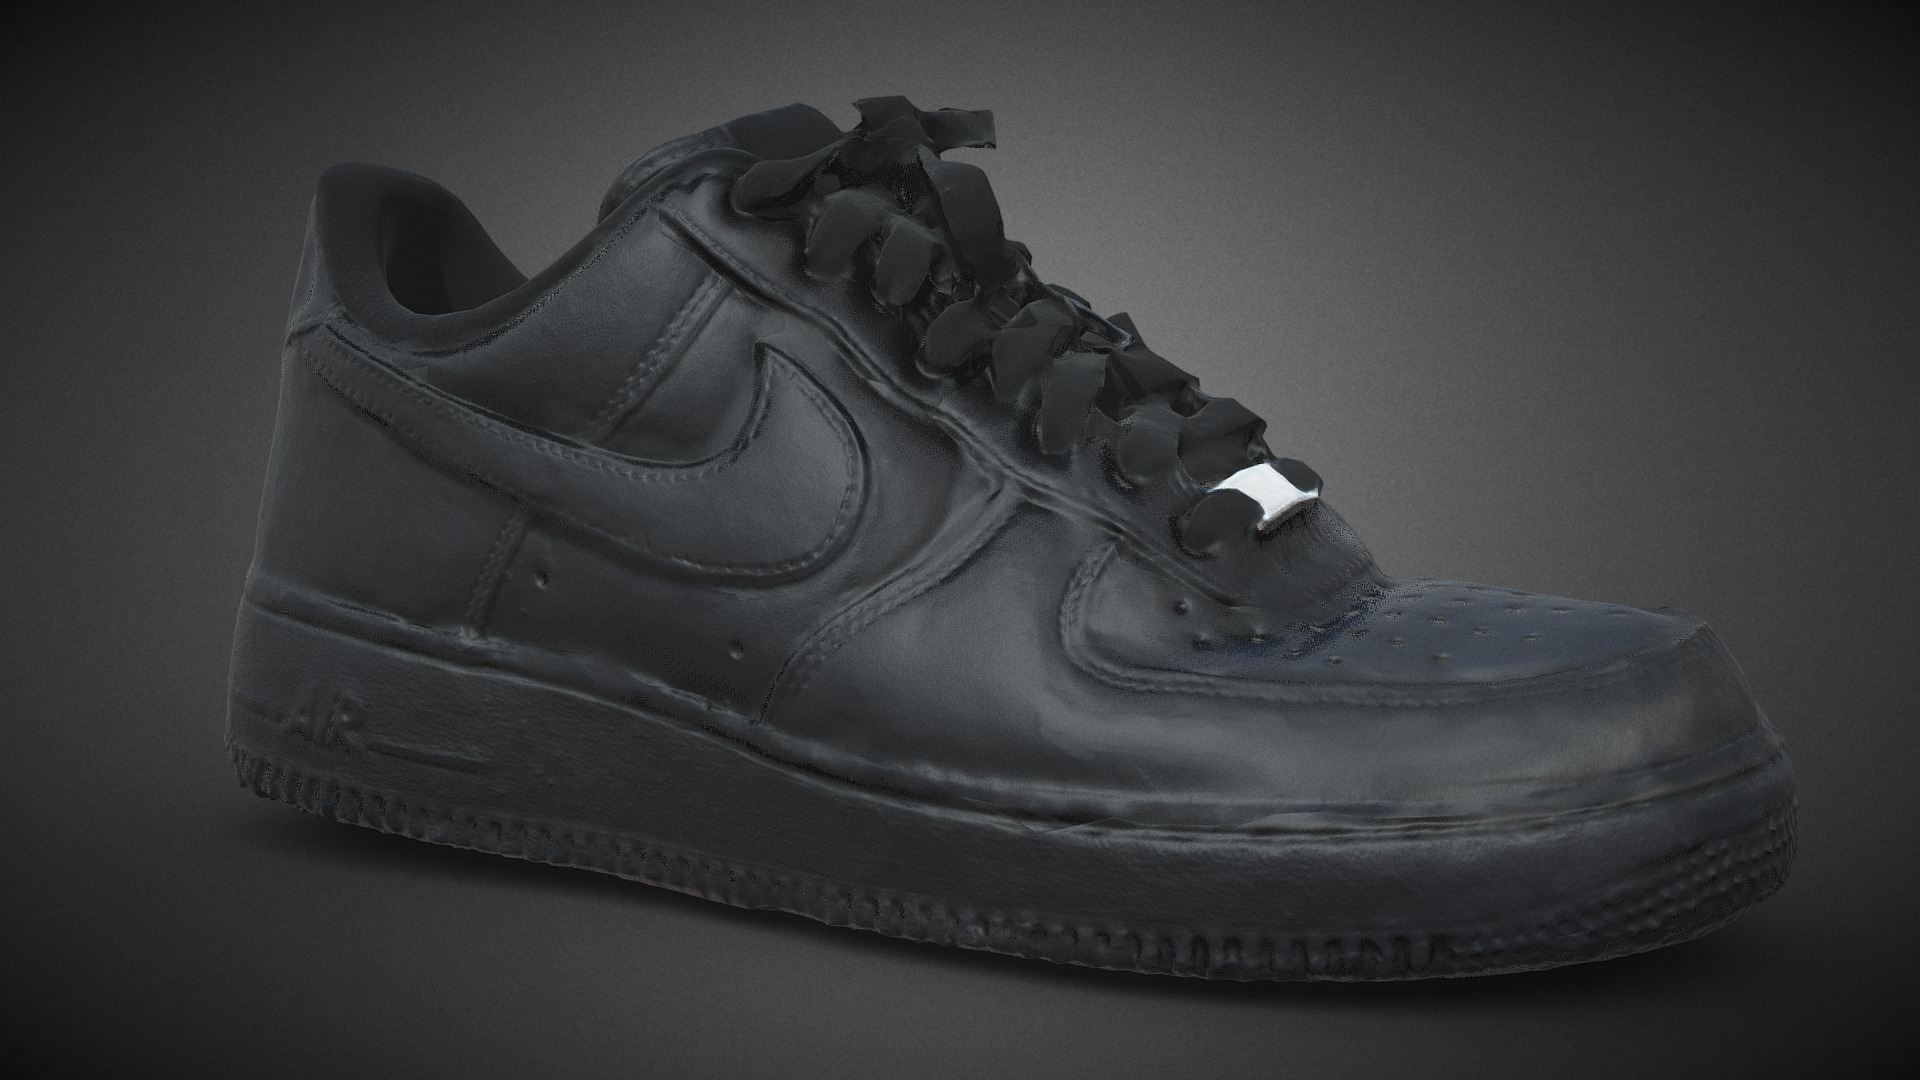 Famous Nike Air Force One scan. 
Scan of 179 shots  with DSLR Sony a300, process with Reality Capture. Low poly model with 4K textures - Nike Air Force One - Buy Royalty Free 3D model by 3DSCANFR (sdrn) (@3DSCANFR) 3d model